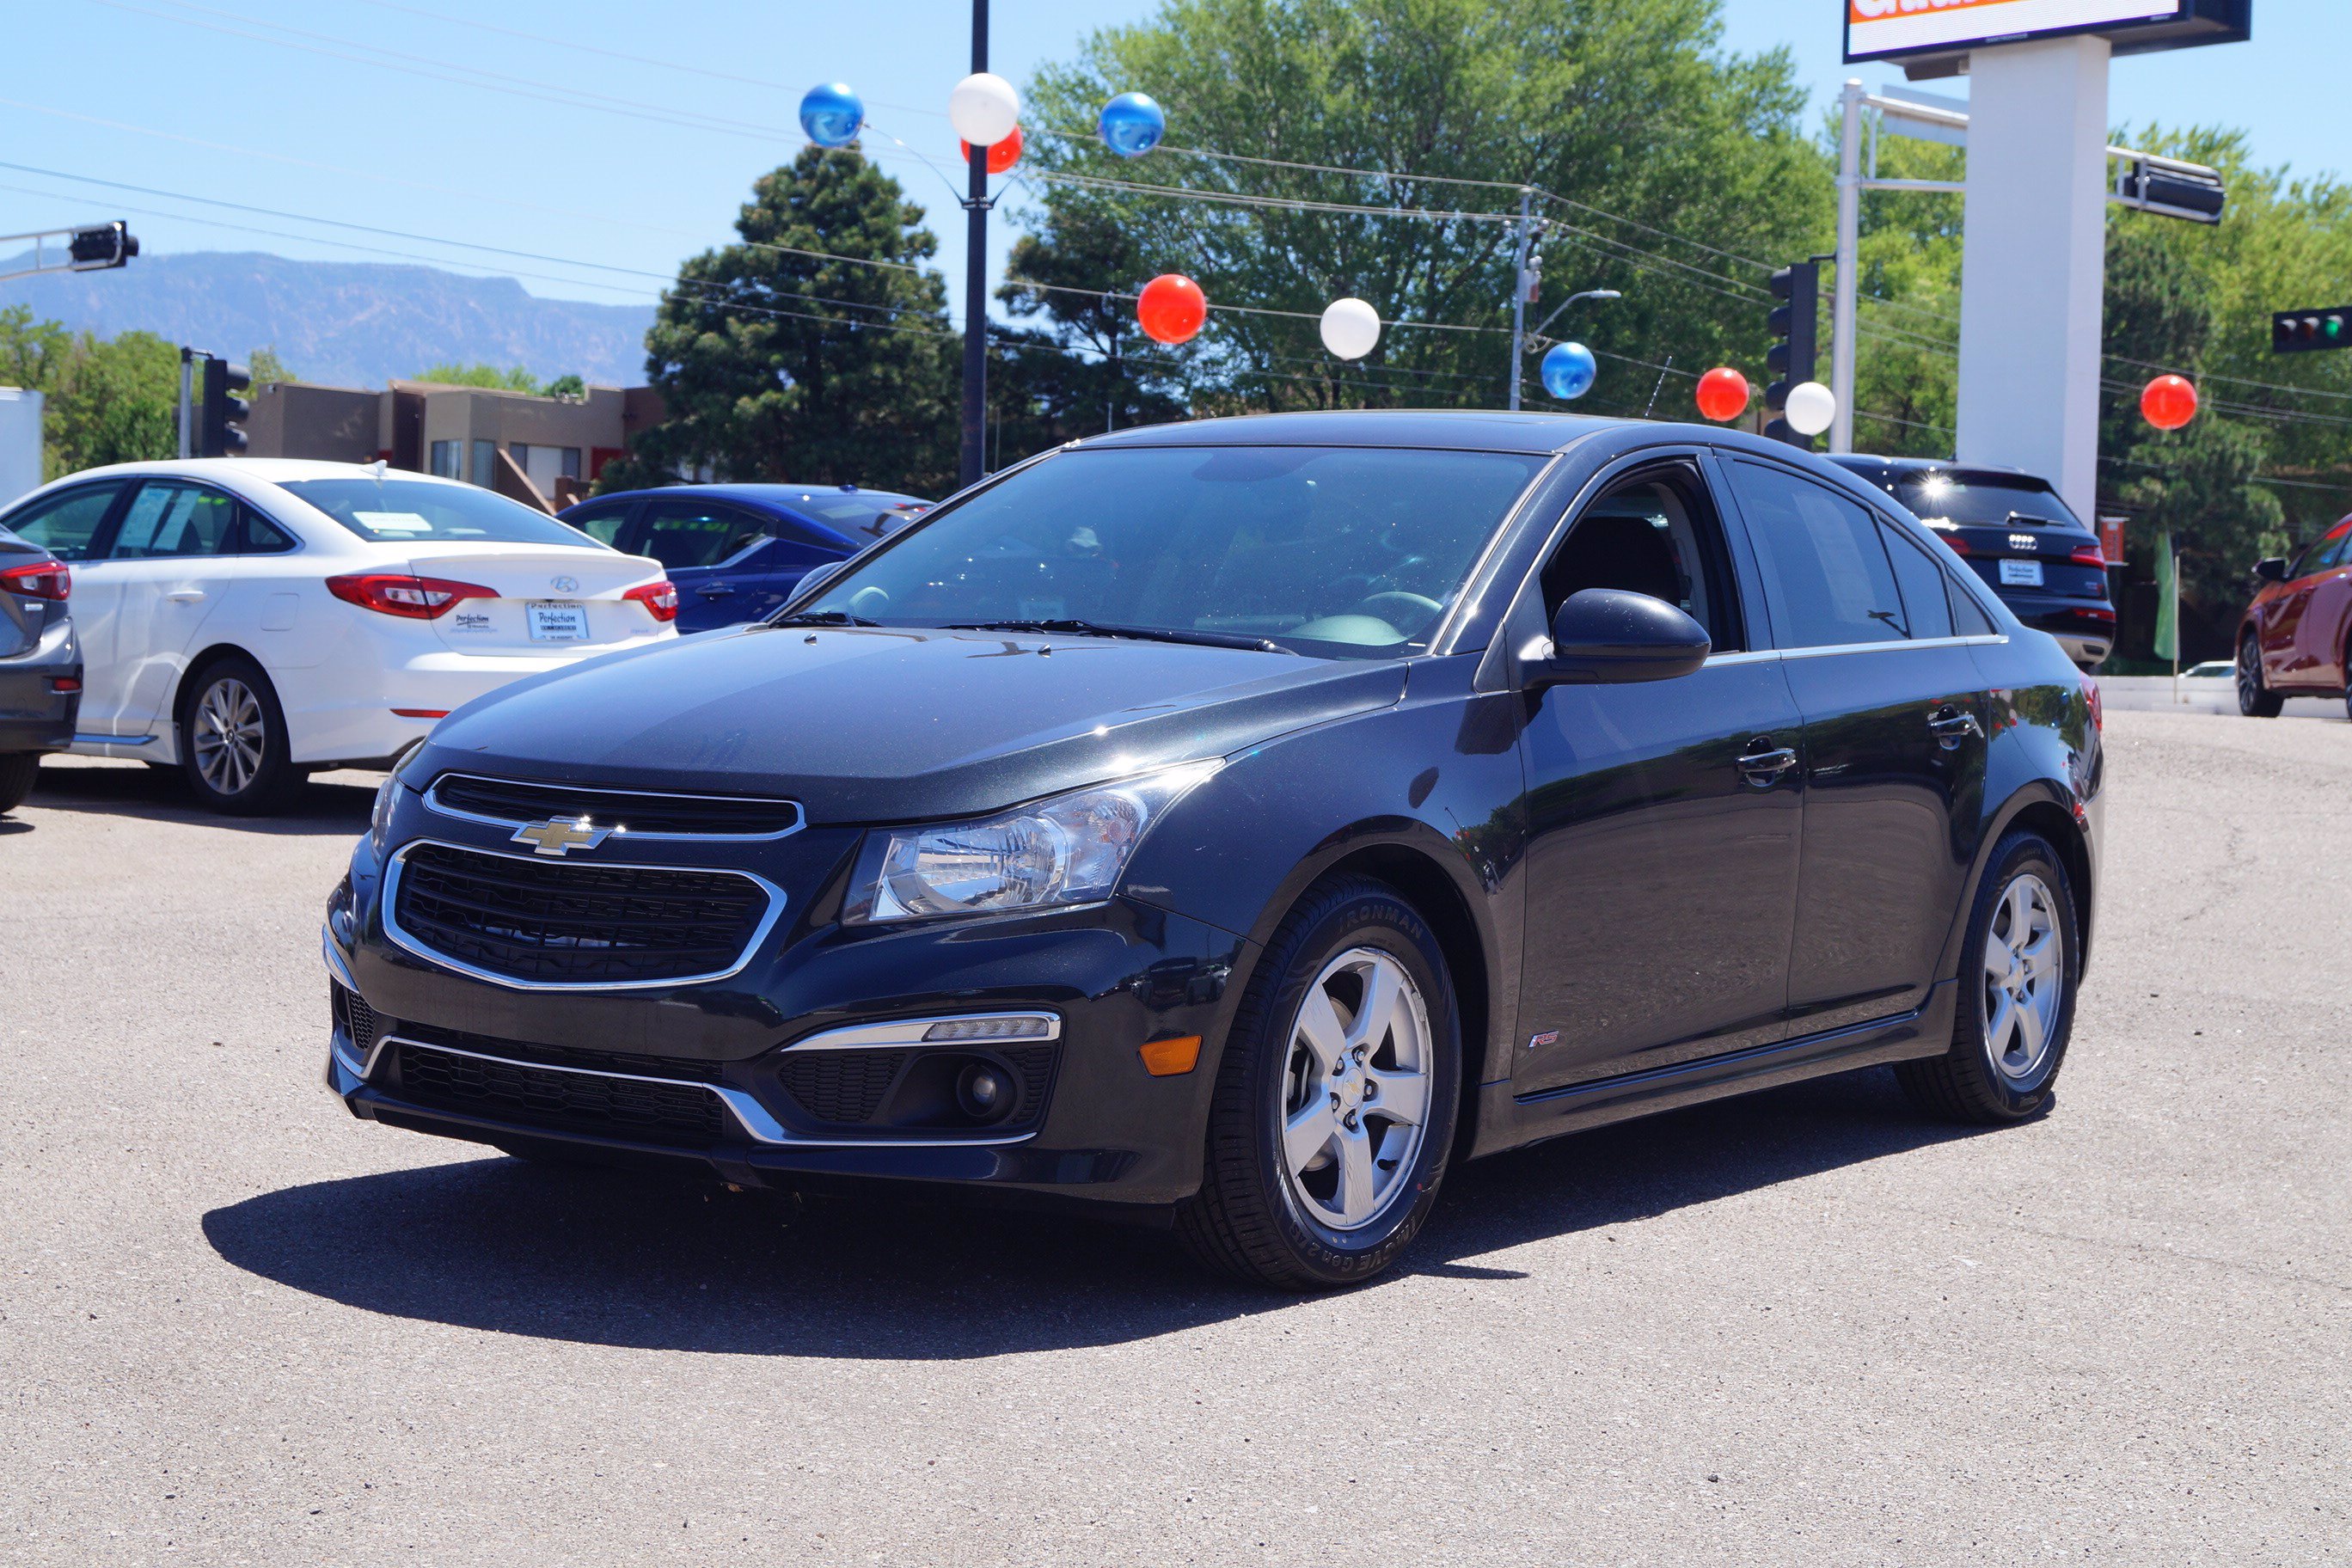 PreOwned 2016 Chevrolet Cruze Limited LT 4dr Car in